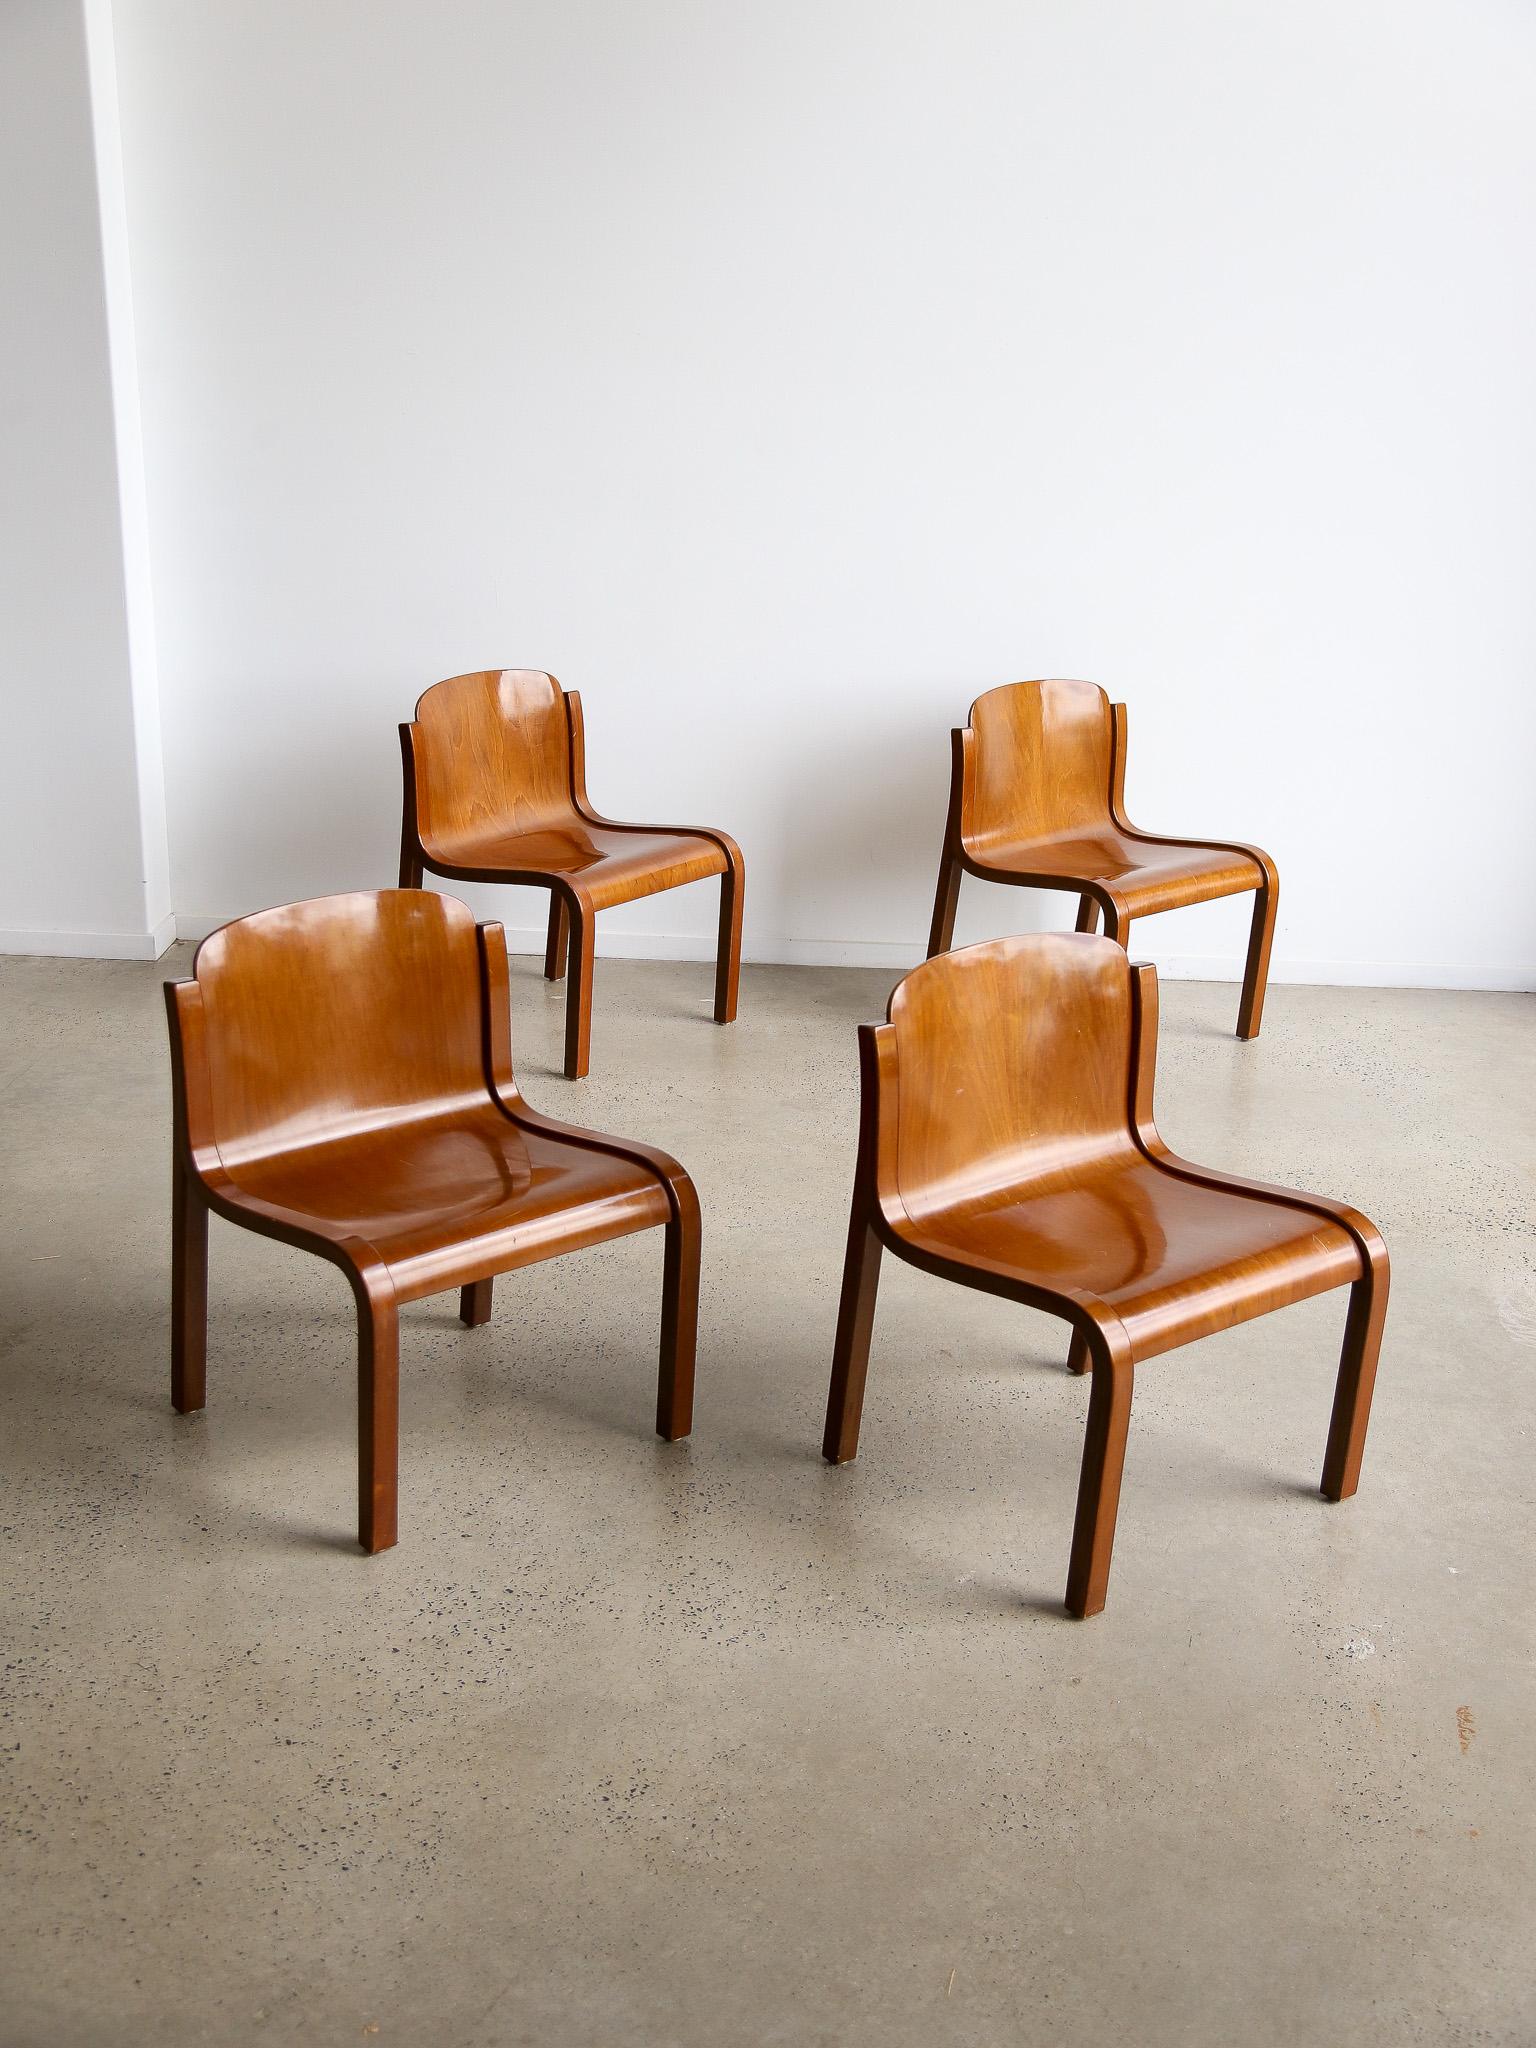 Mid Century Modern set of four Mito chairs by Carlo Bartoli for Tisettanta. These chairs are extremely light weight and made from one bent plywood sheet with beech frame.  

Carlo Bartoli (1931–2018) was an Italian designer known for his